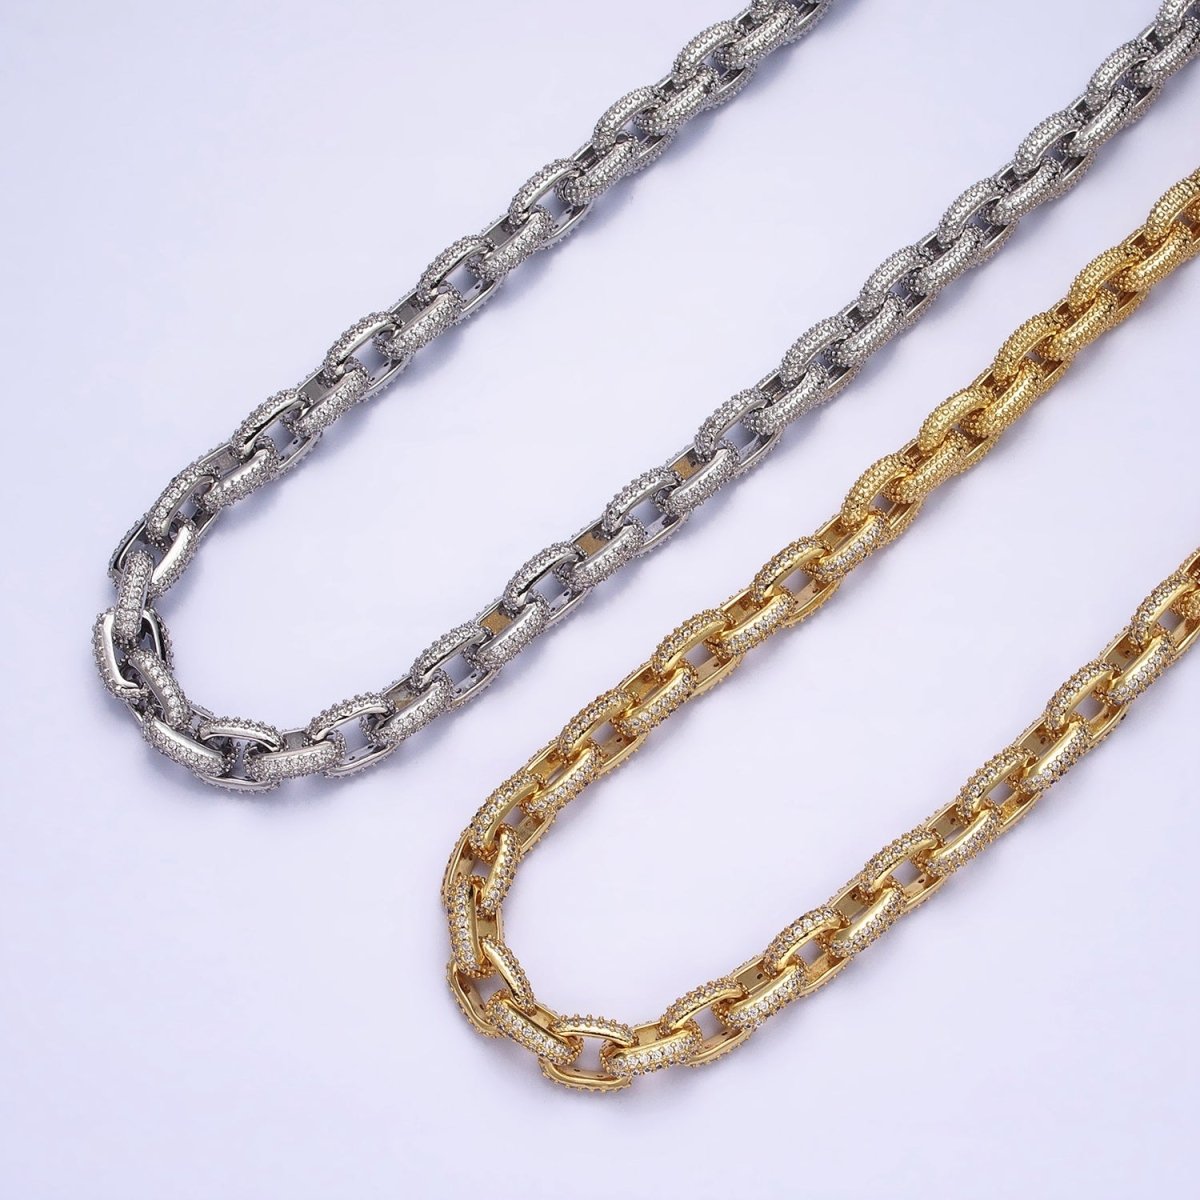 Micro Pave CZ Diamond Link Chain Necklace 24K Gold Filled Necklace Statement Jewelry | WA-1694 WA-1695 Clearance Pricing - DLUXCA